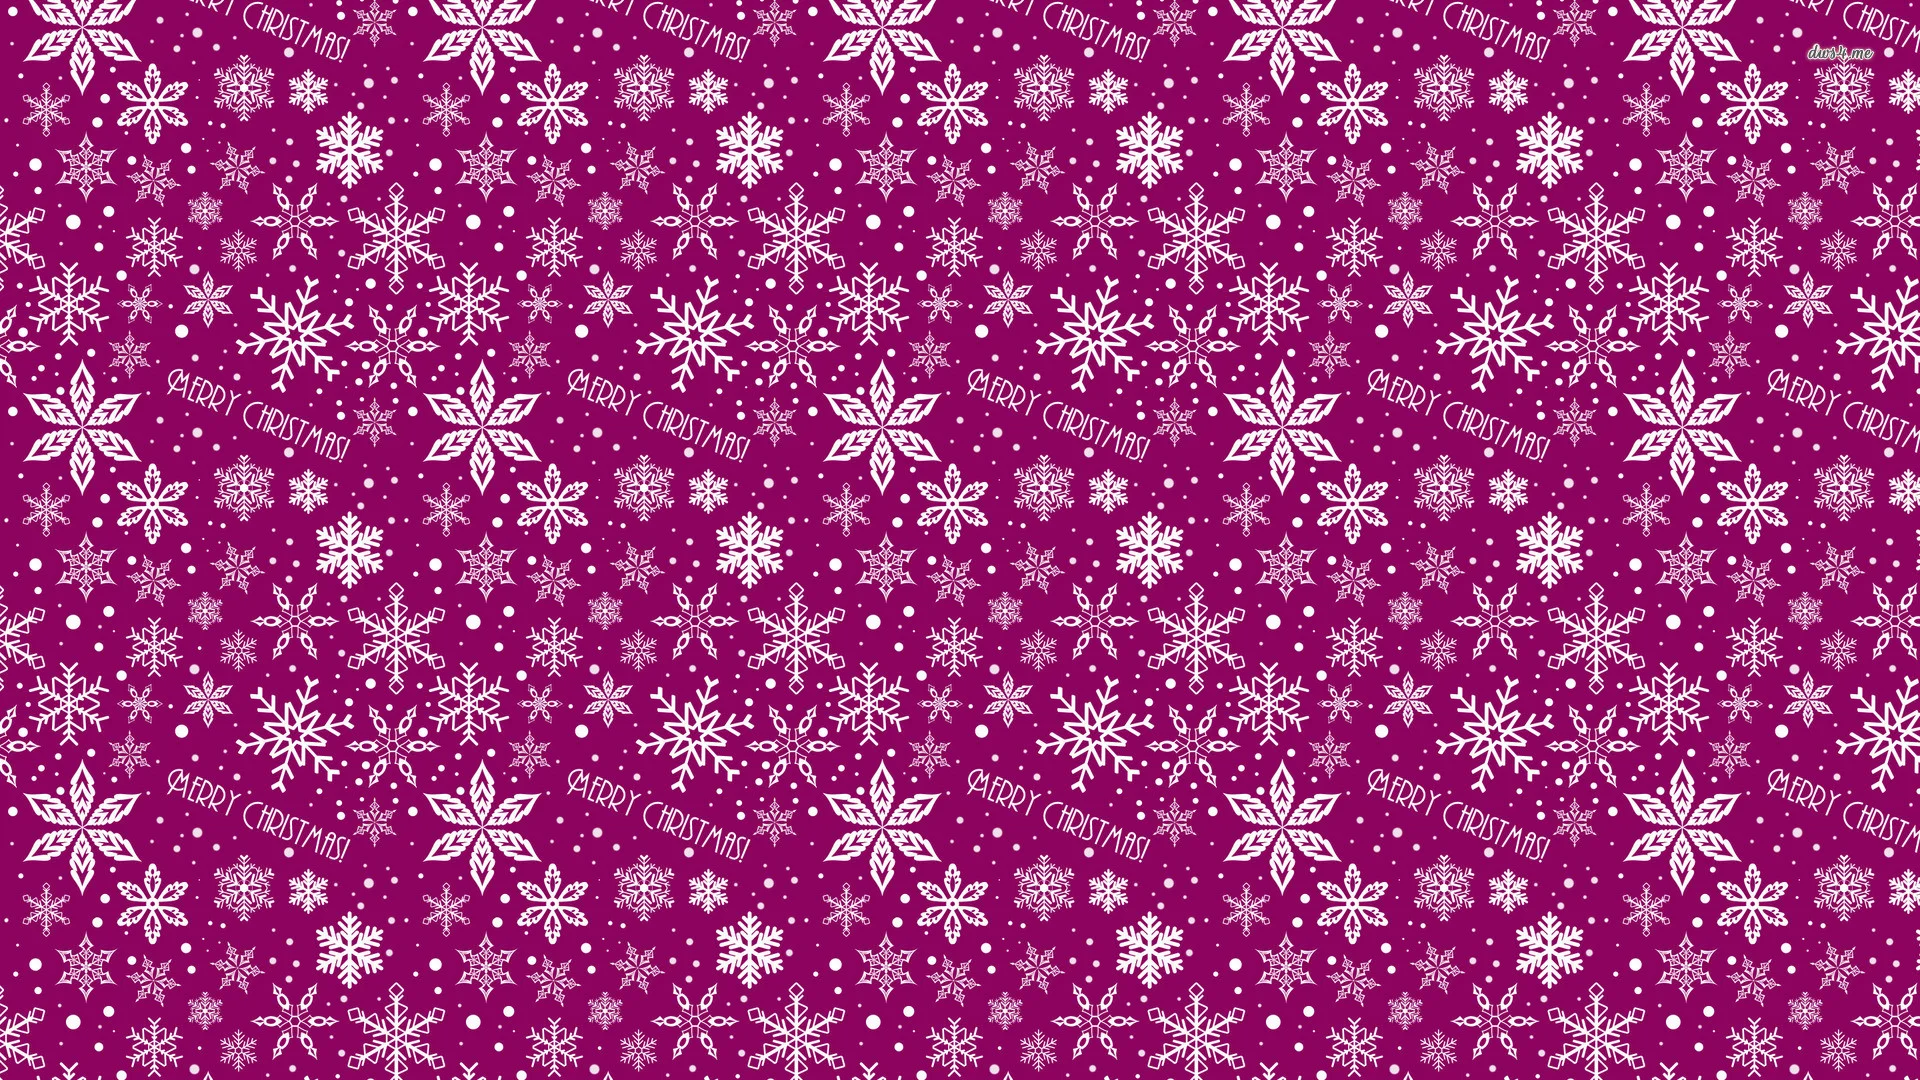 Great Christmas Wallpaper Sites images Christmas Pattern HD wallpaper and  background photos